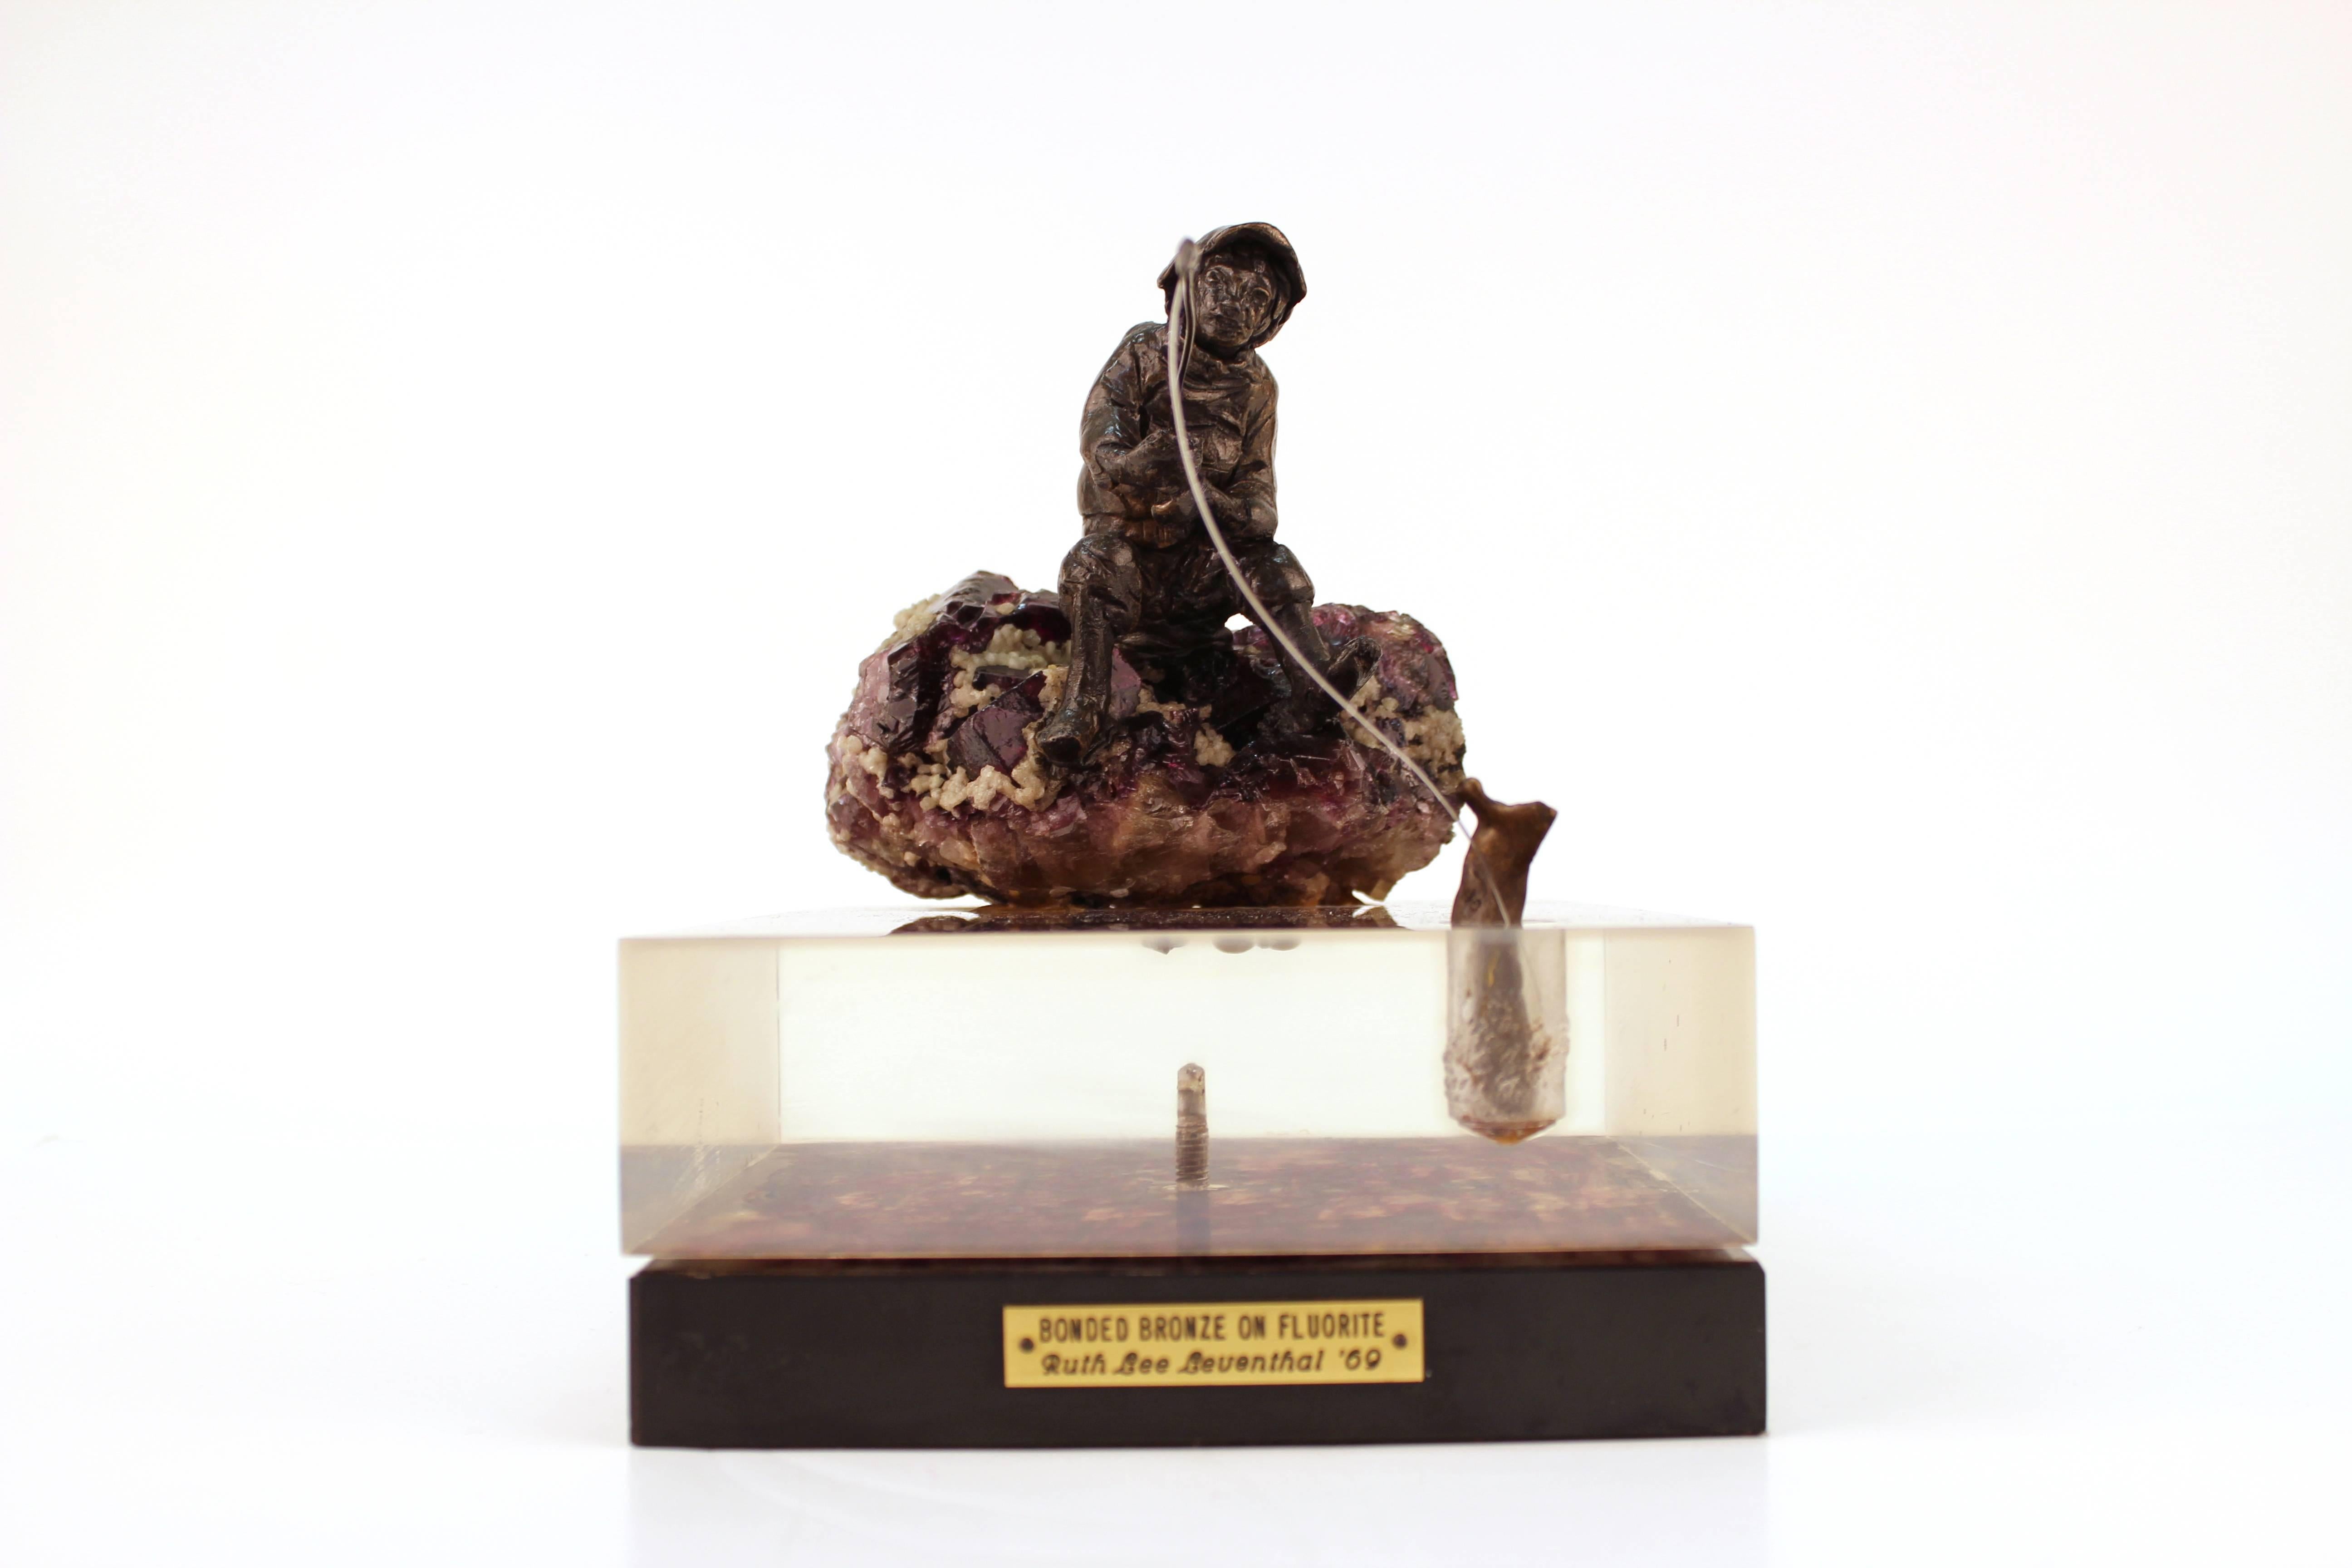 Ruth Lee Leventhal Sculpture of a Fisherman in Bronze and Fluorite 2